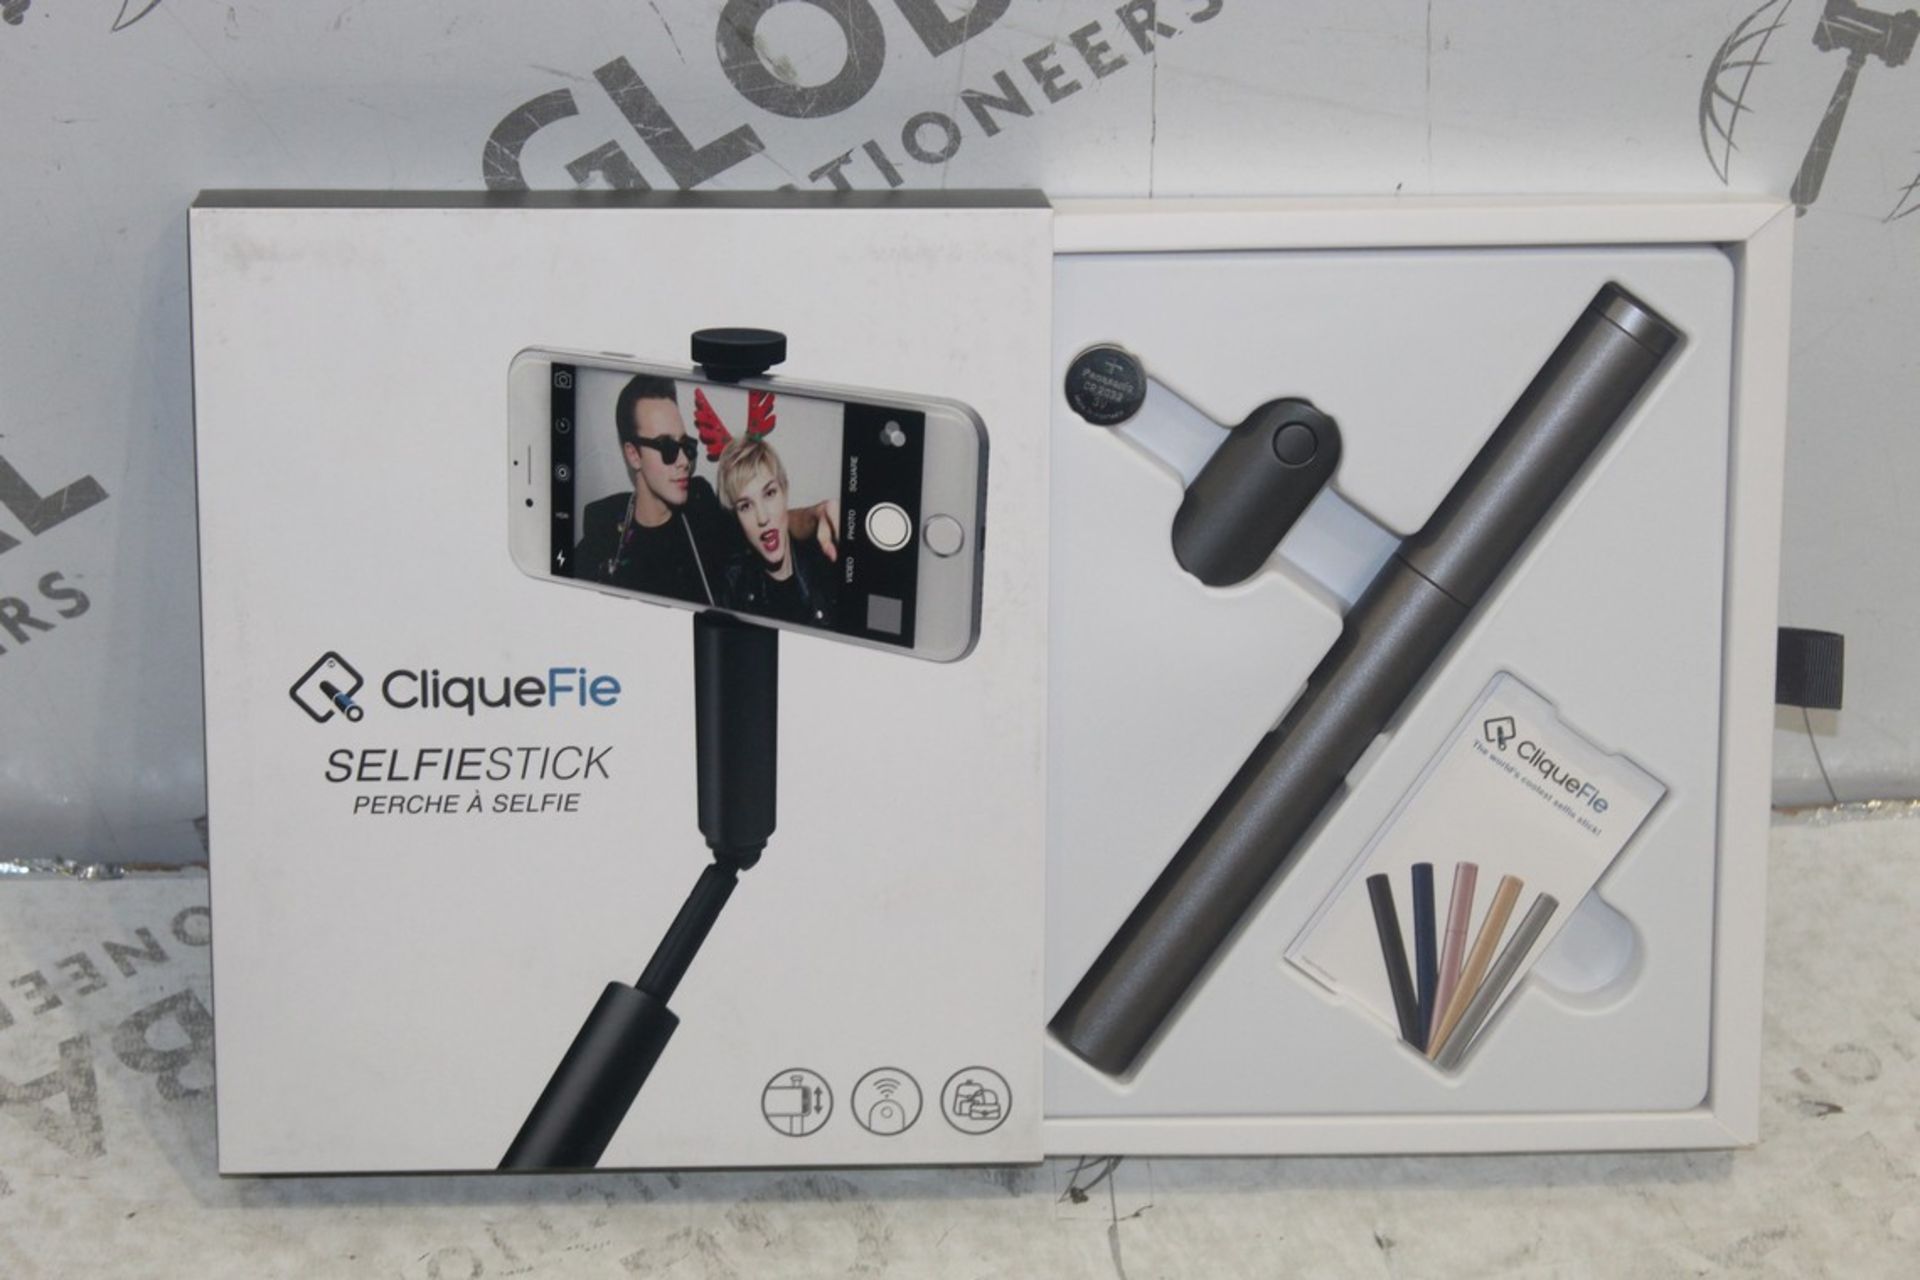 Box To Contain 6 Cliquefie Space Grey Selfie Sticks Combined RRP £240 (Pictures Are For Illustration